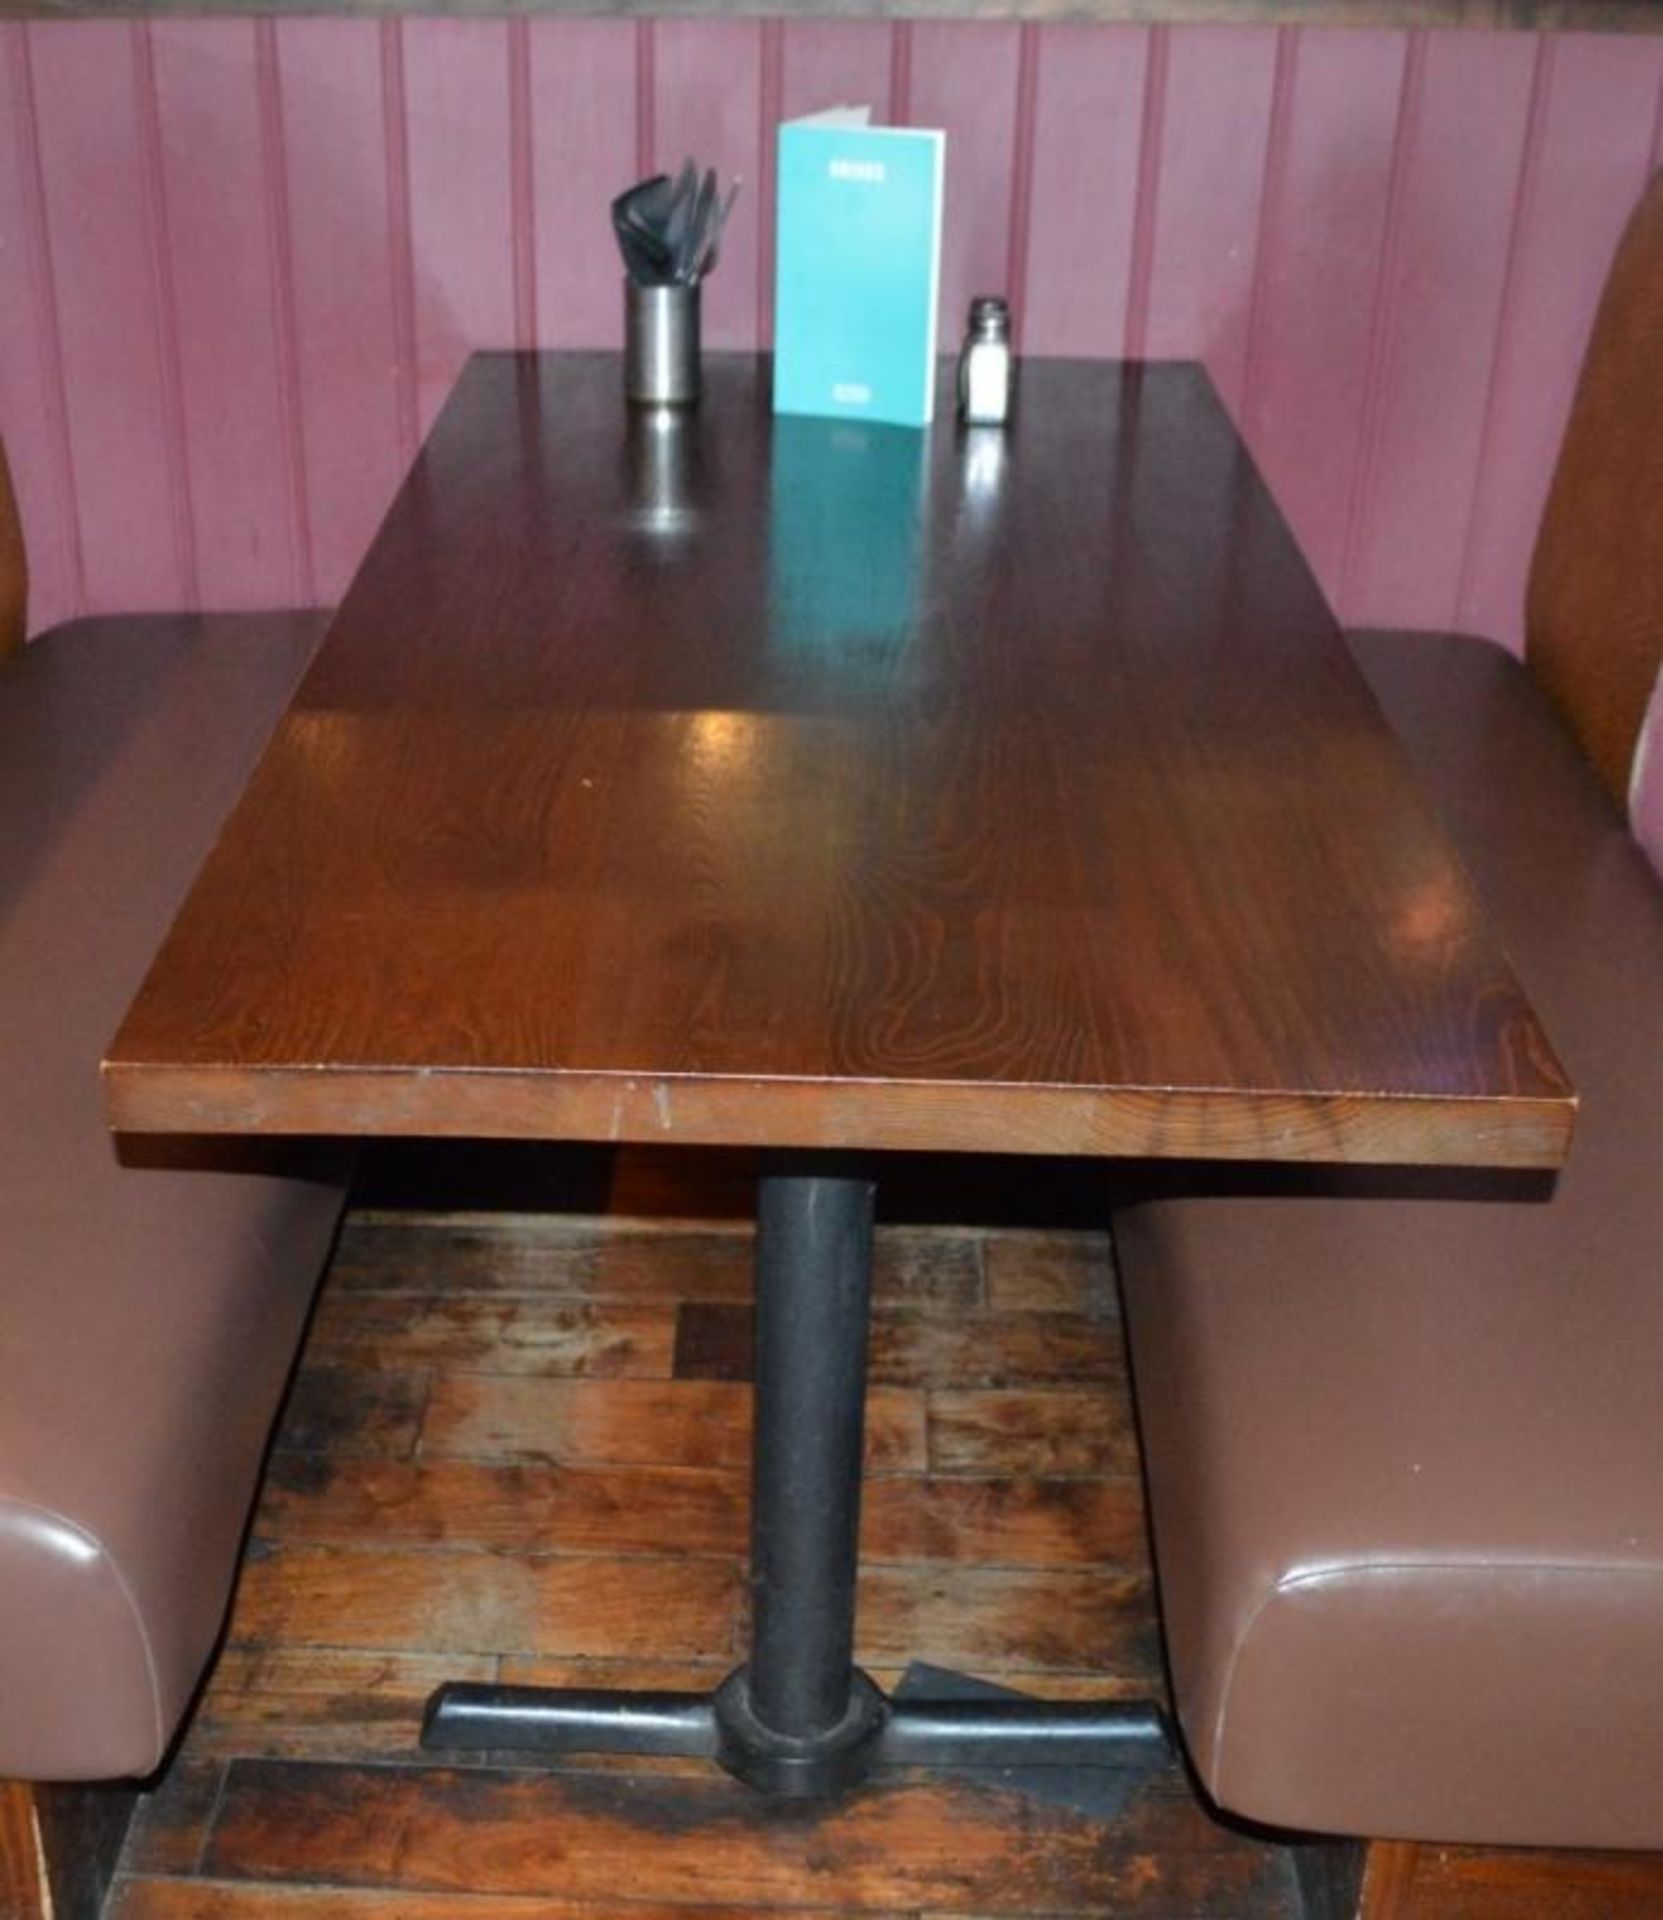 5 x Medium Wood Topped Bistro Tables With Metal Bases - Dimensions: H75 x W117 x D75cm - CL367 - Ref - Image 2 of 2